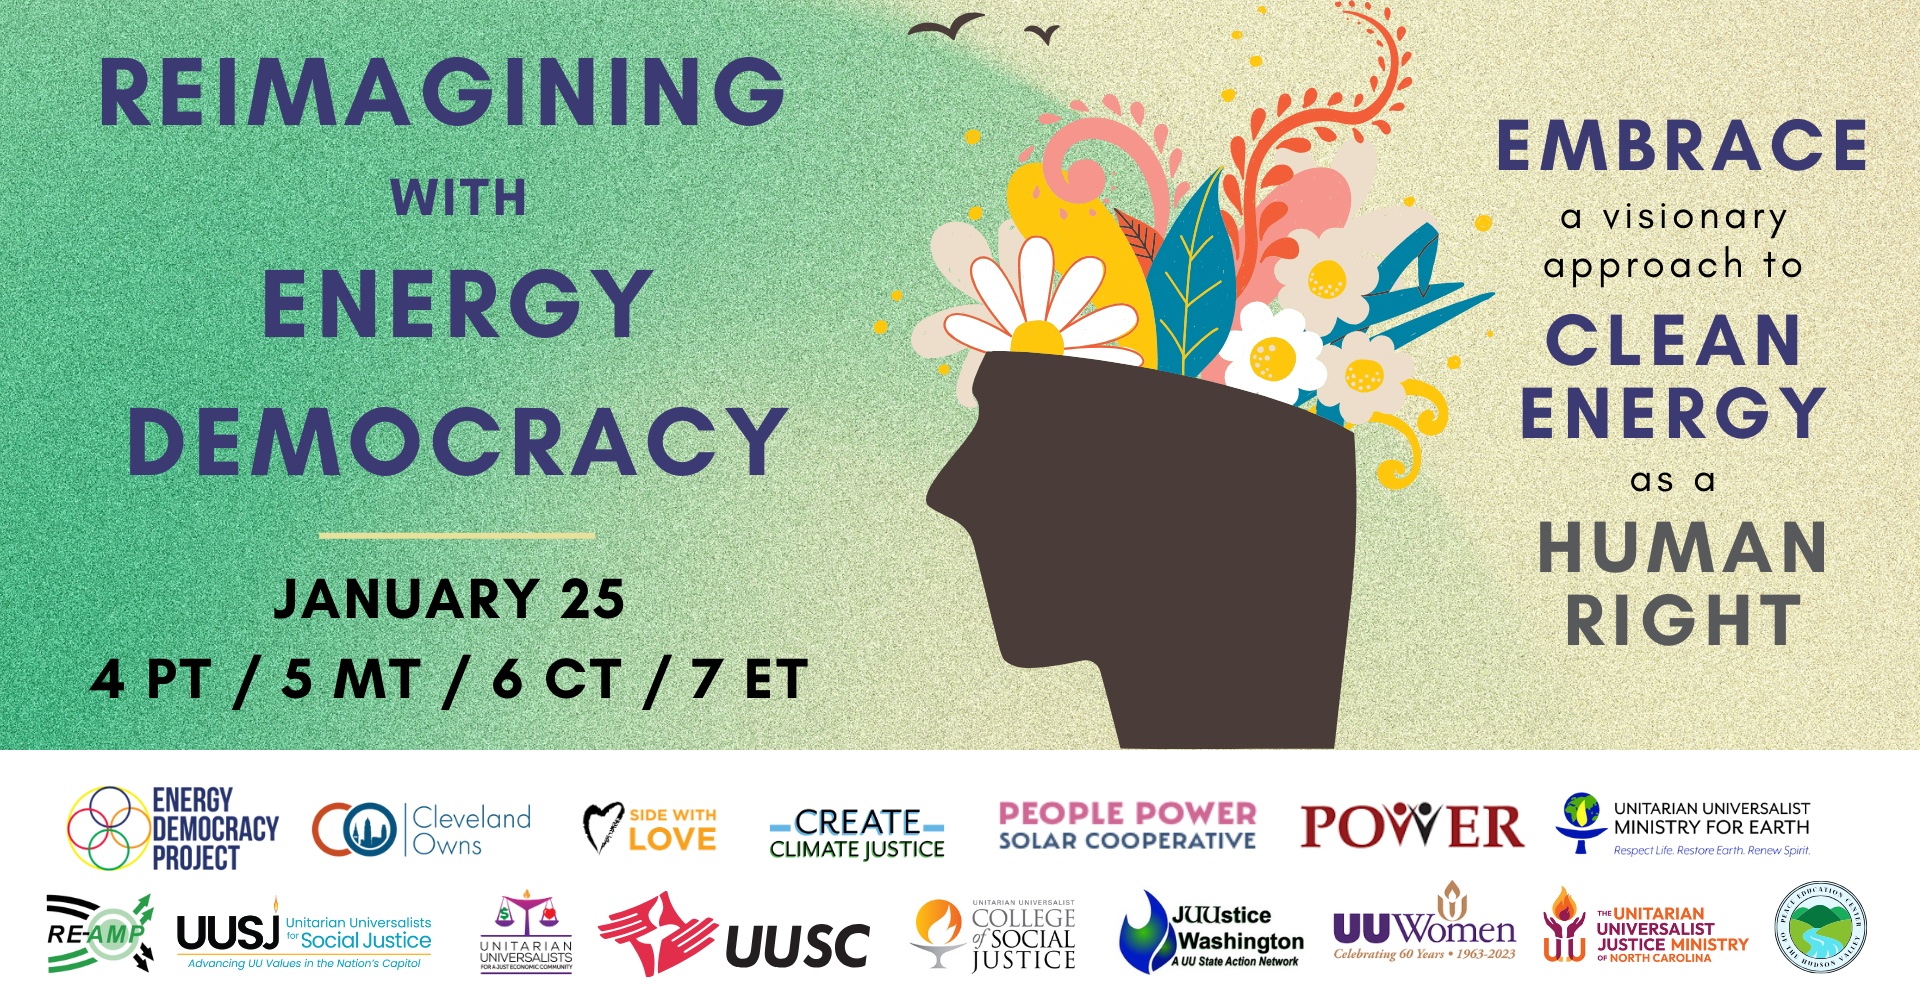 REIMAGINING WITH ENERGY DEMOCRACY JANUARY 25 4 PT / 5 MT / 6 CT 7 ET EMBRACE a visionary approach to CLEAN ENERGY as a HUMAN RIGHT logos of 16 sponsoring organizations (listed in blog post)